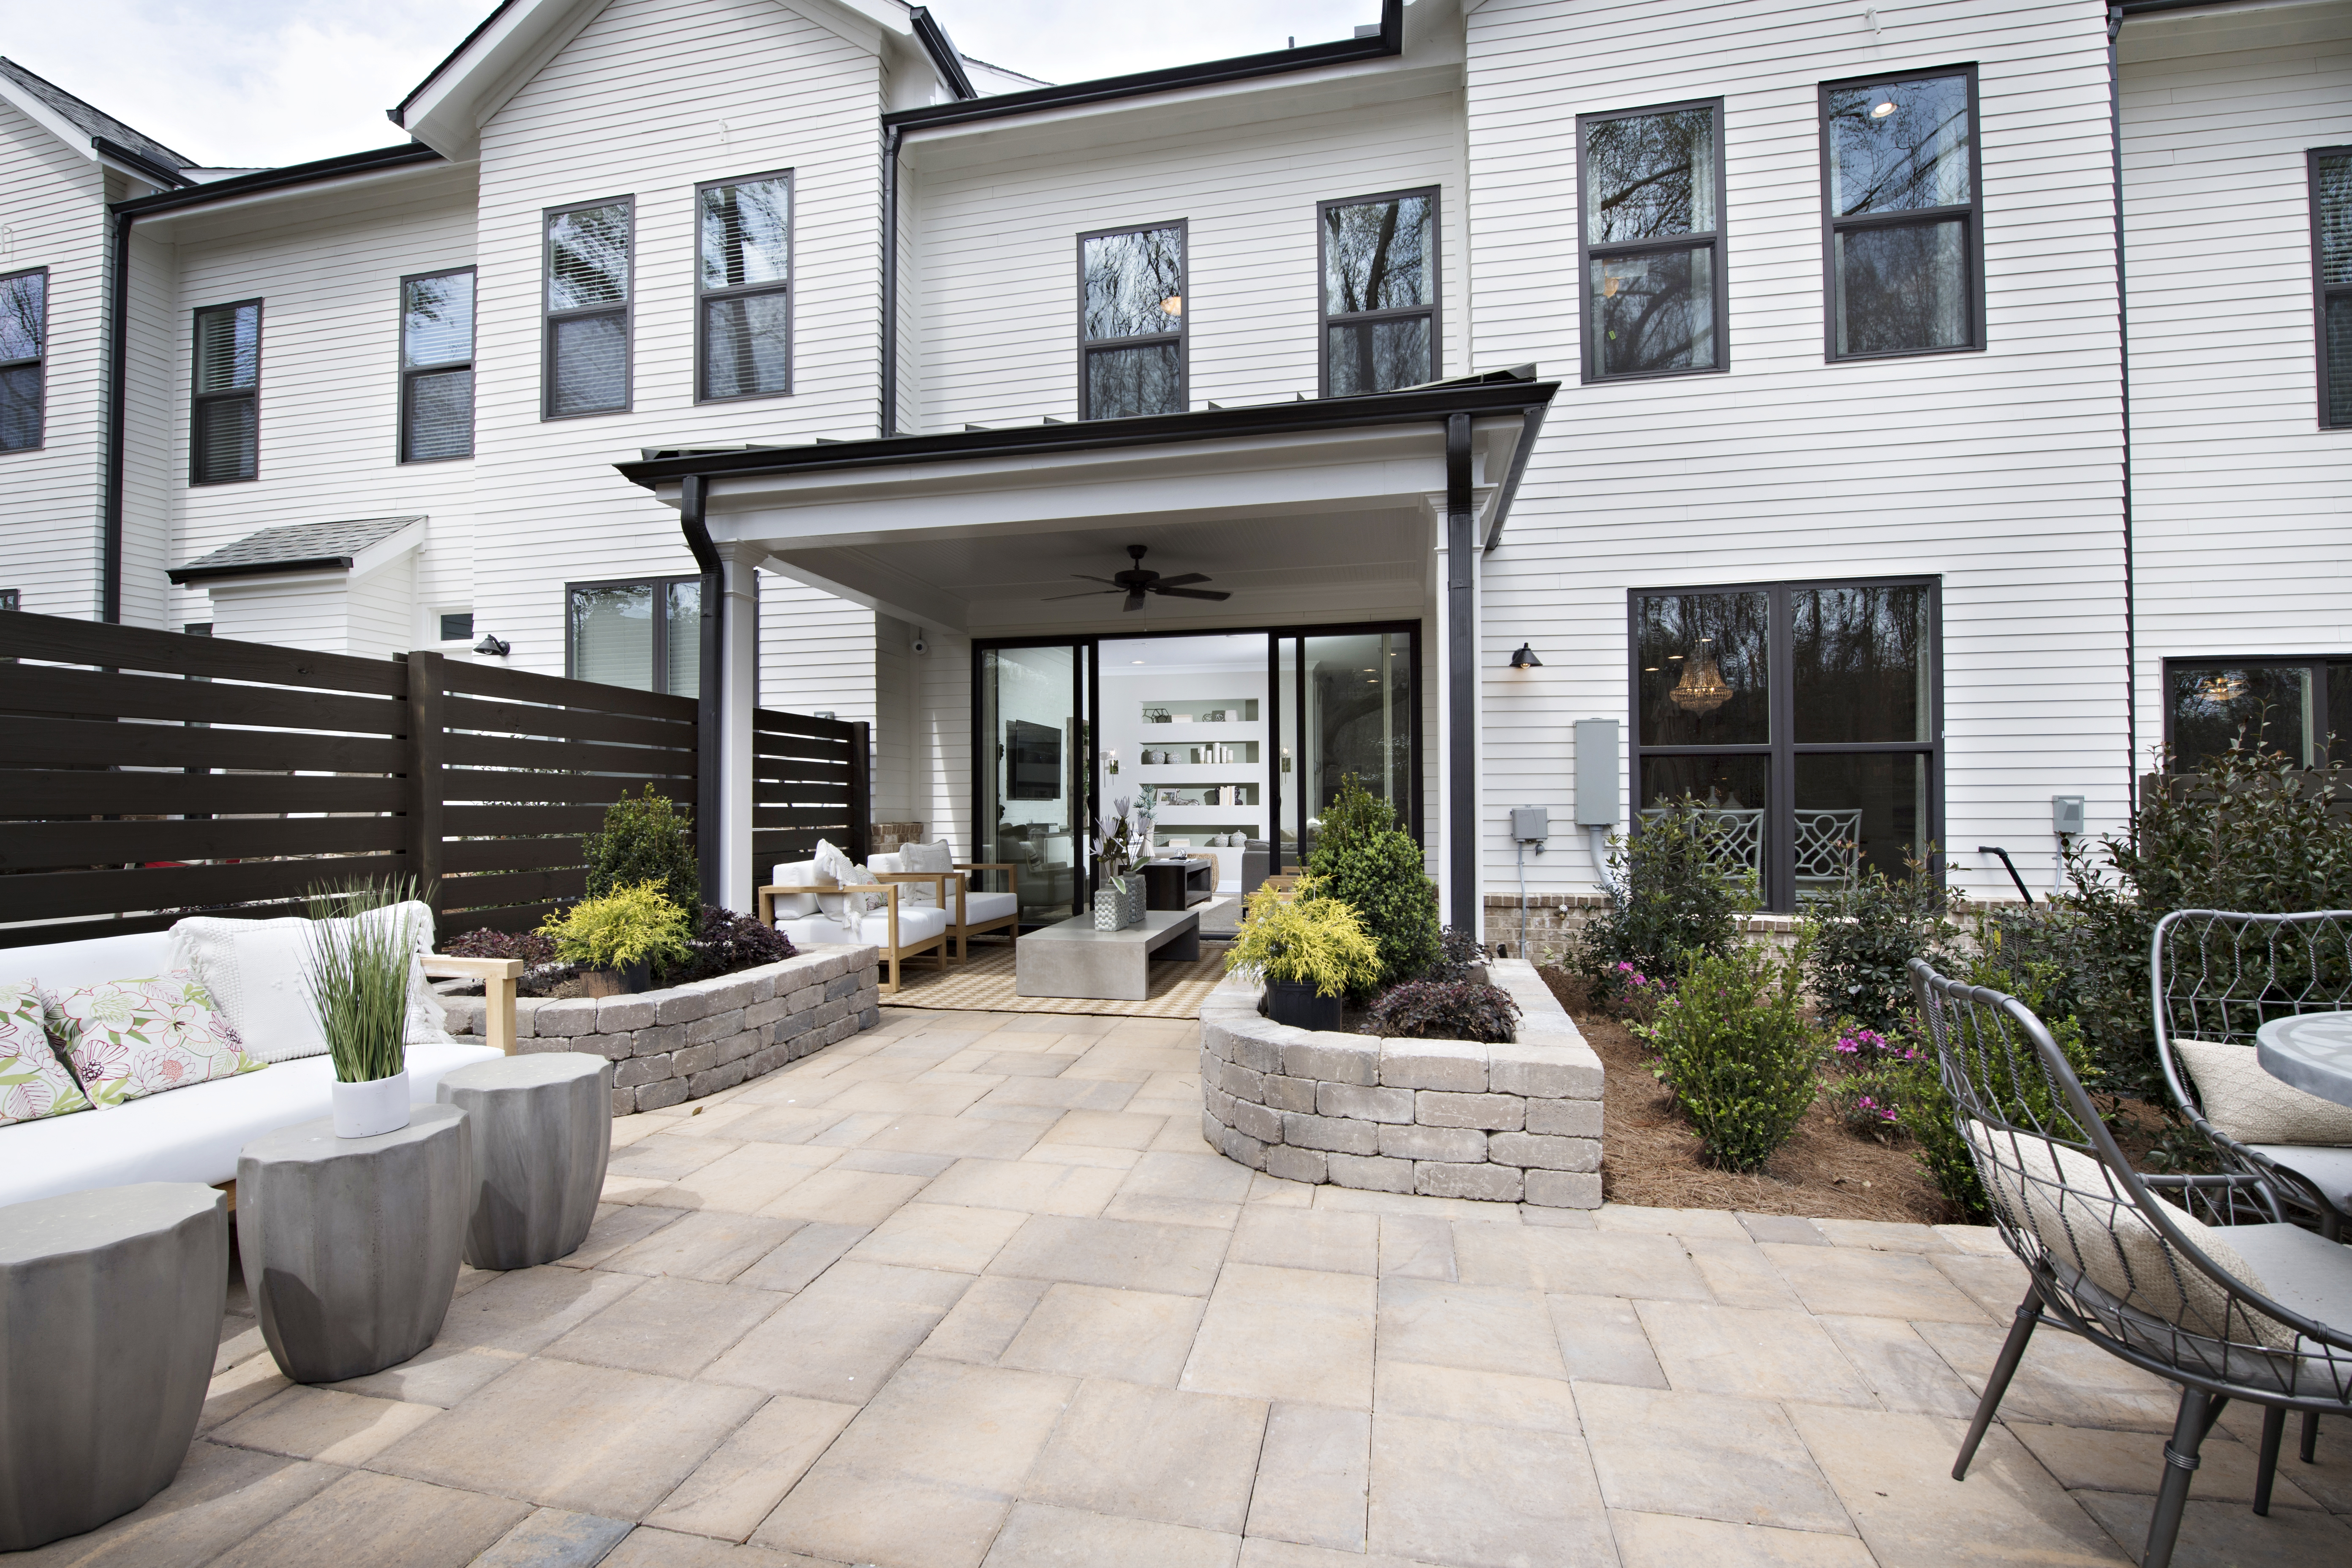 The Providence Group Opens New Townhome Model at Chelsea Walk